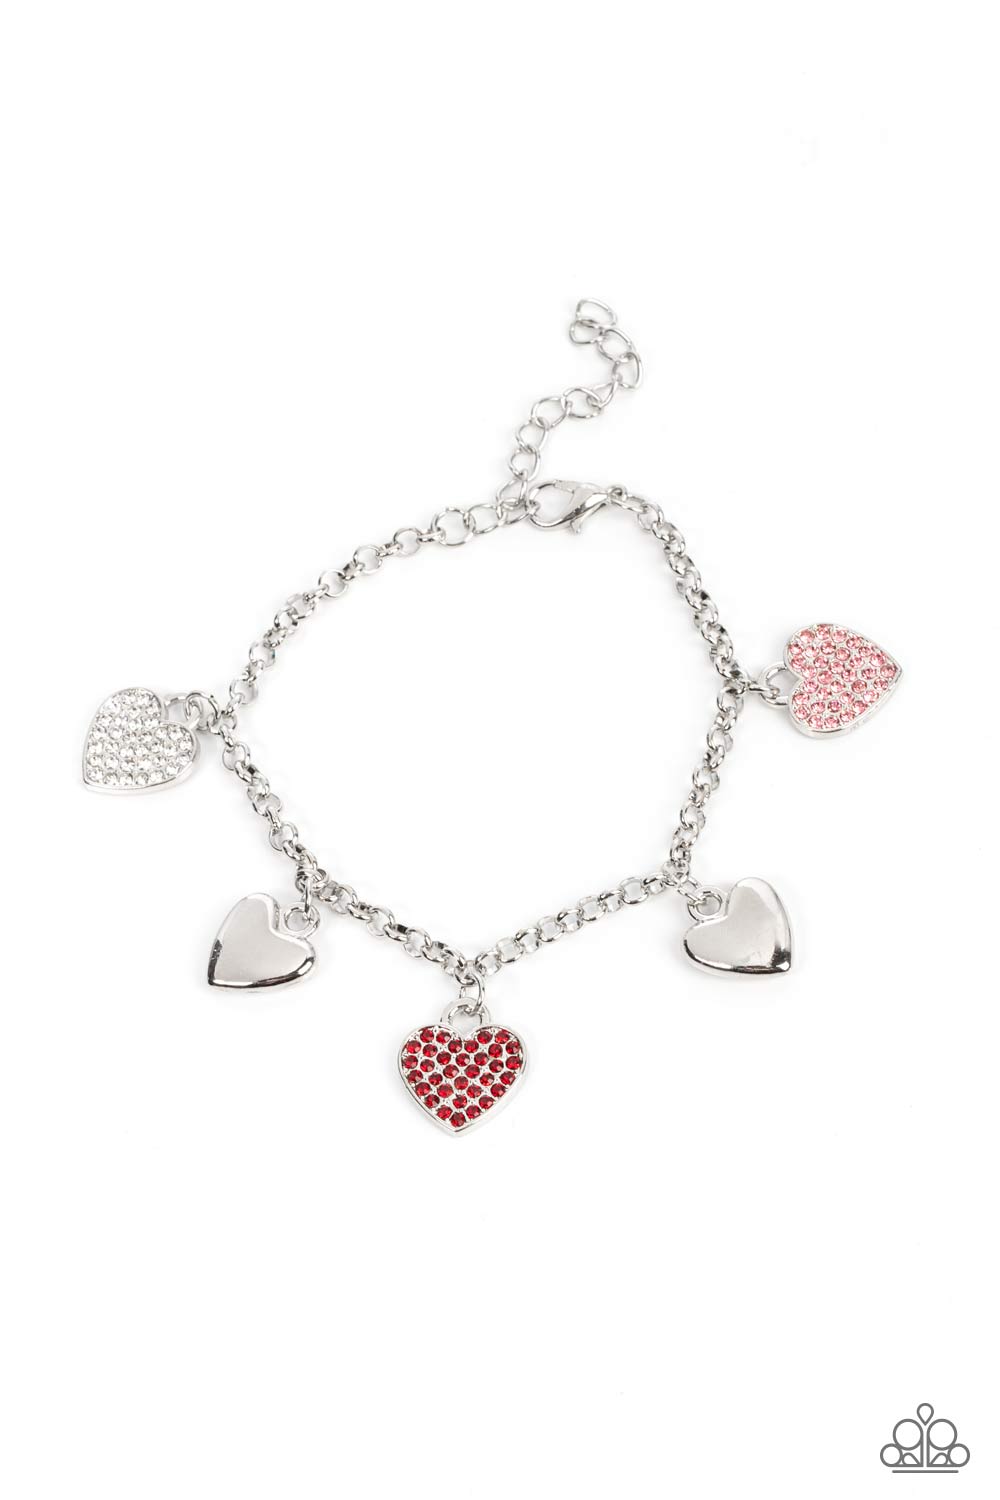 Lusty Lockets Multi Red and Pink Heart Charm Bracelet - Paparazzi Accessories- lightbox - CarasShop.com - $5 Jewelry by Cara Jewels